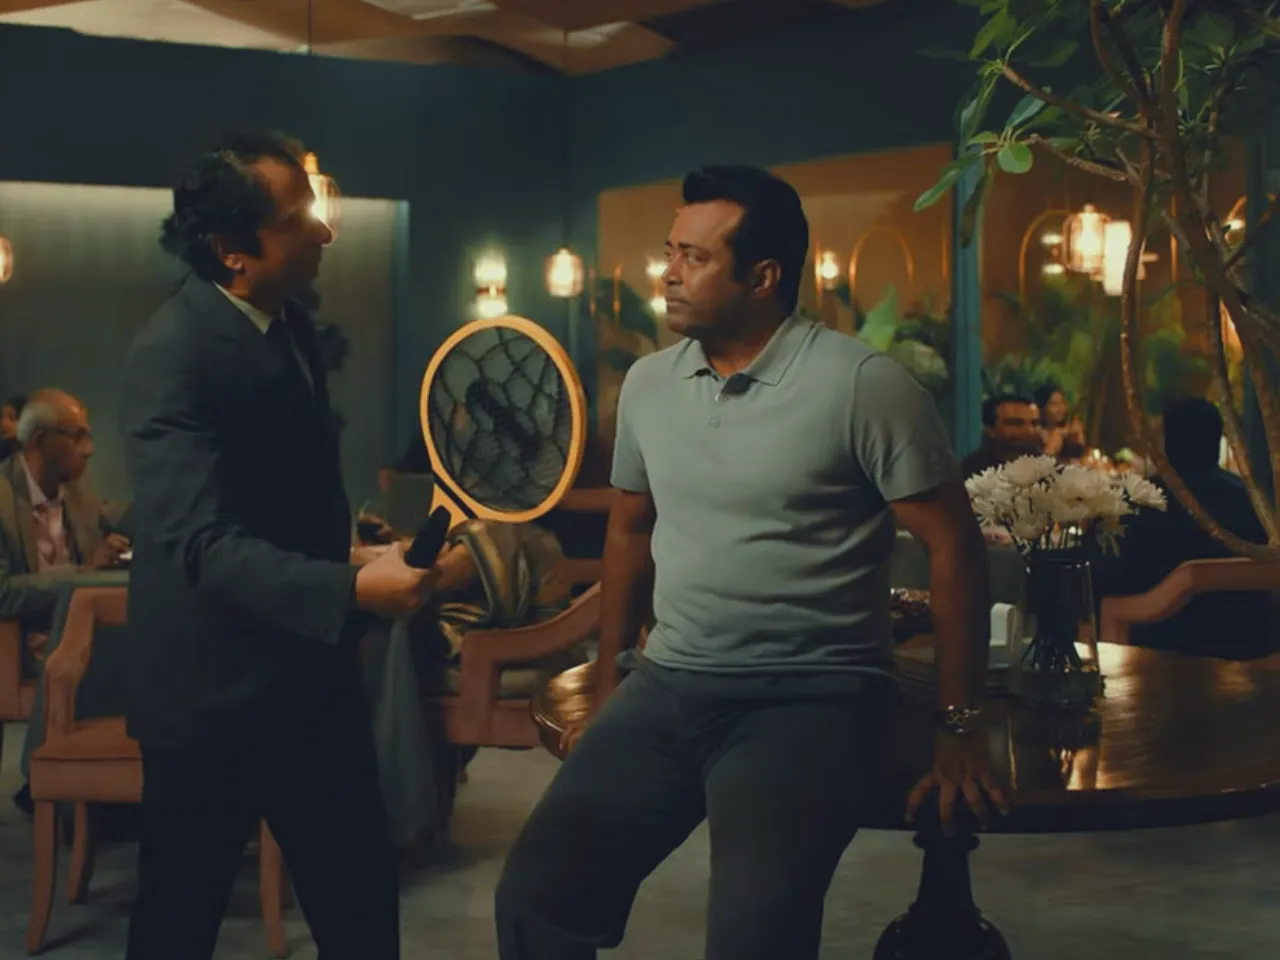 CRED's IPL campaign makes Leander Paes use his tennis skills